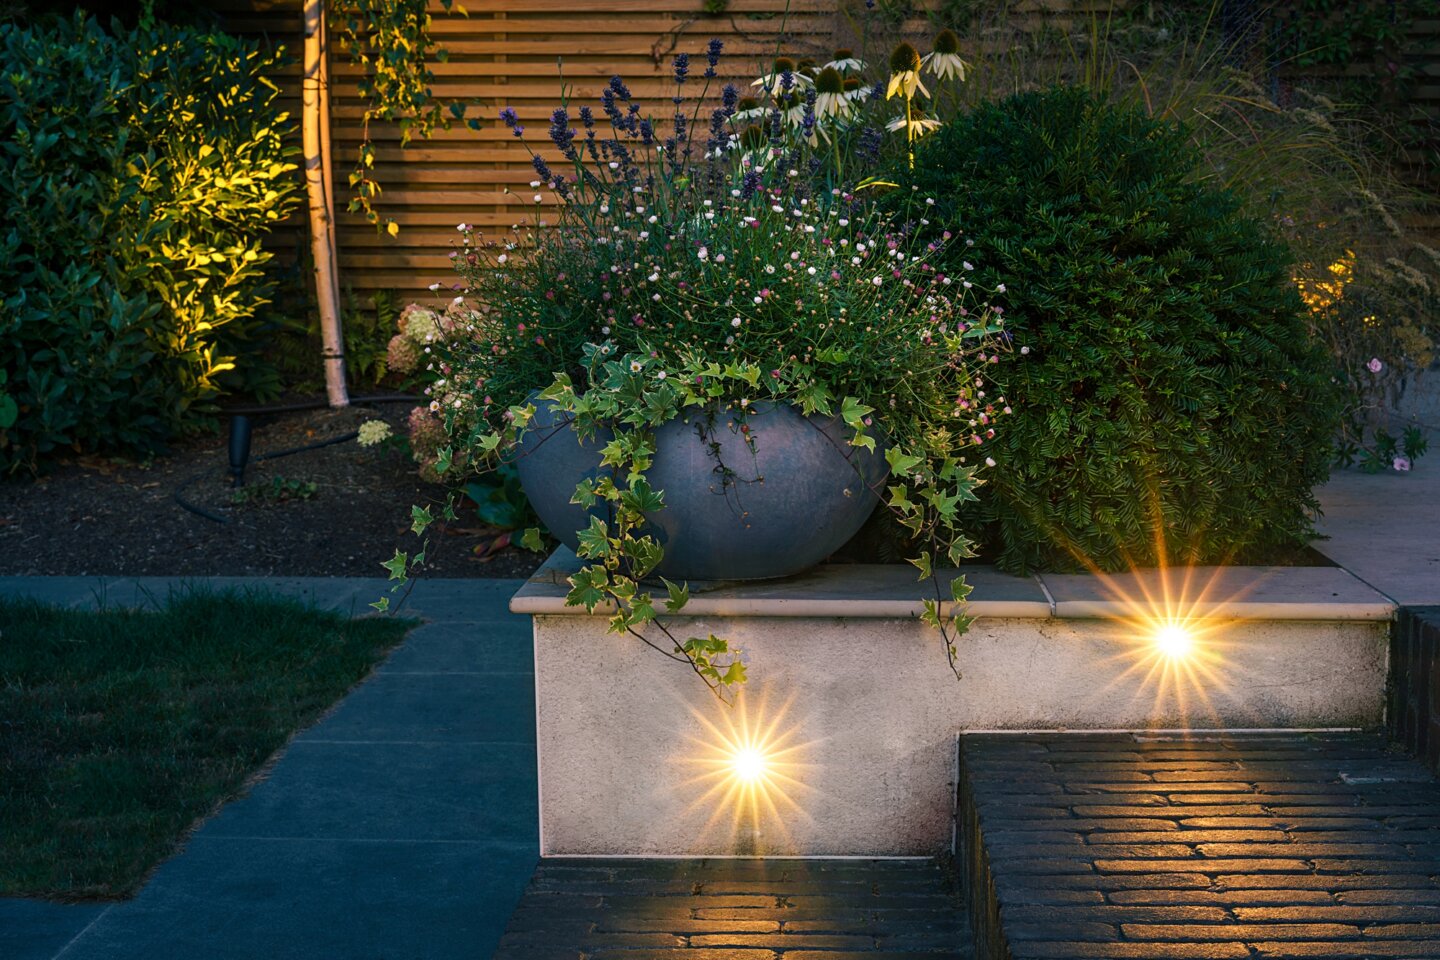 Recessed wall-mounted garden lighting to show outdoor steps, design by Helen Rose Wilson